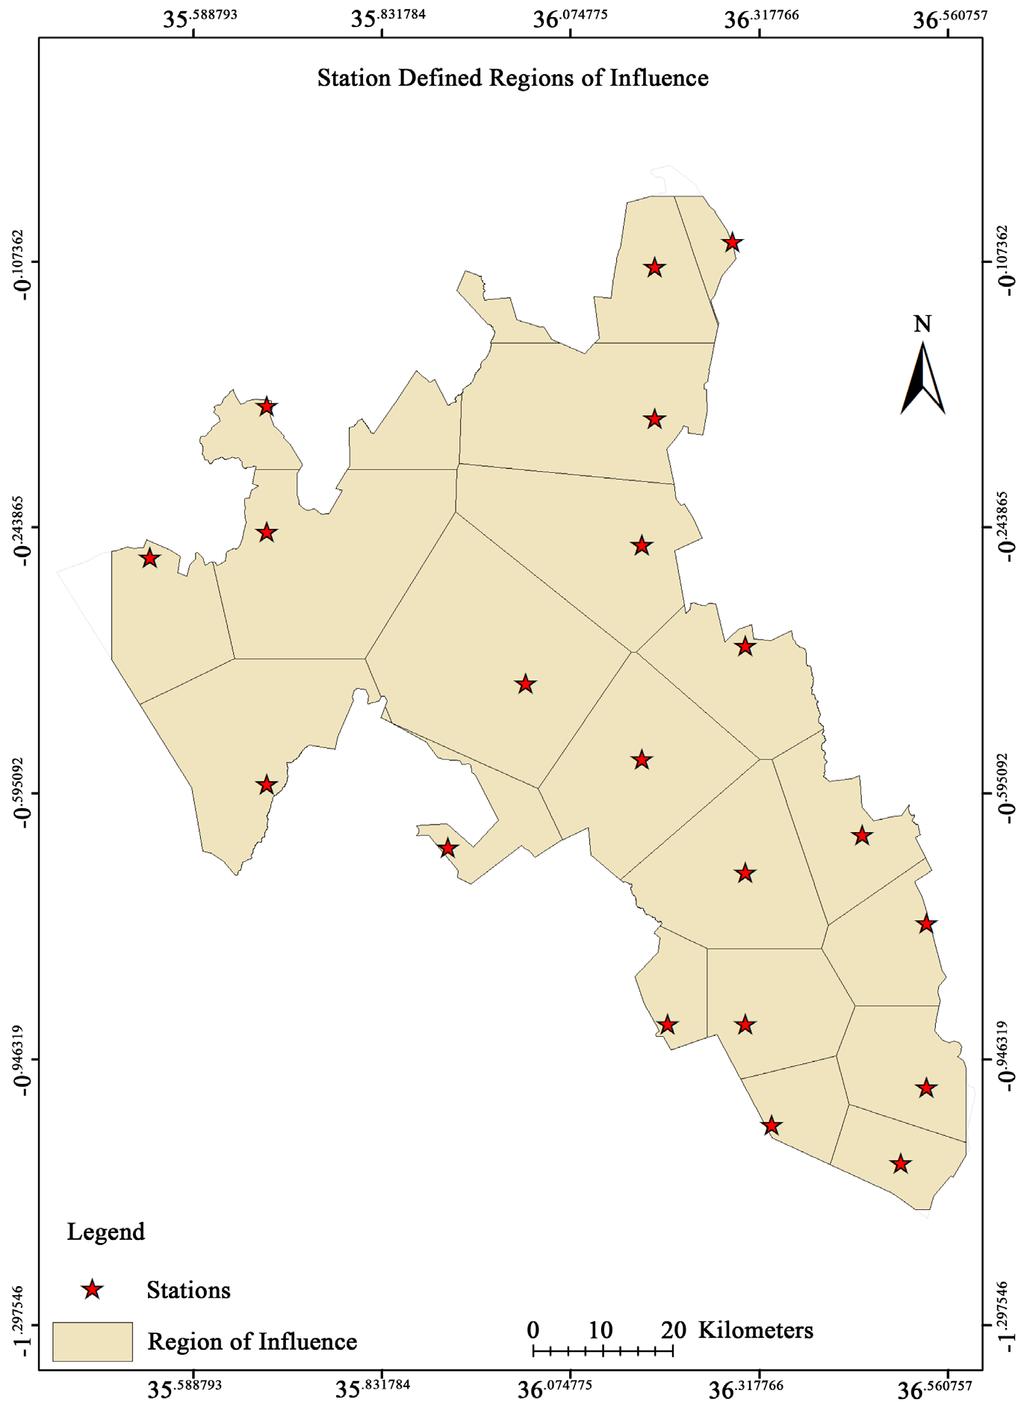 temperature value would be assumed to be constant. Figure 11 shows the ground stations, together with the Thiessen polygons, that serve as the regions of influence.